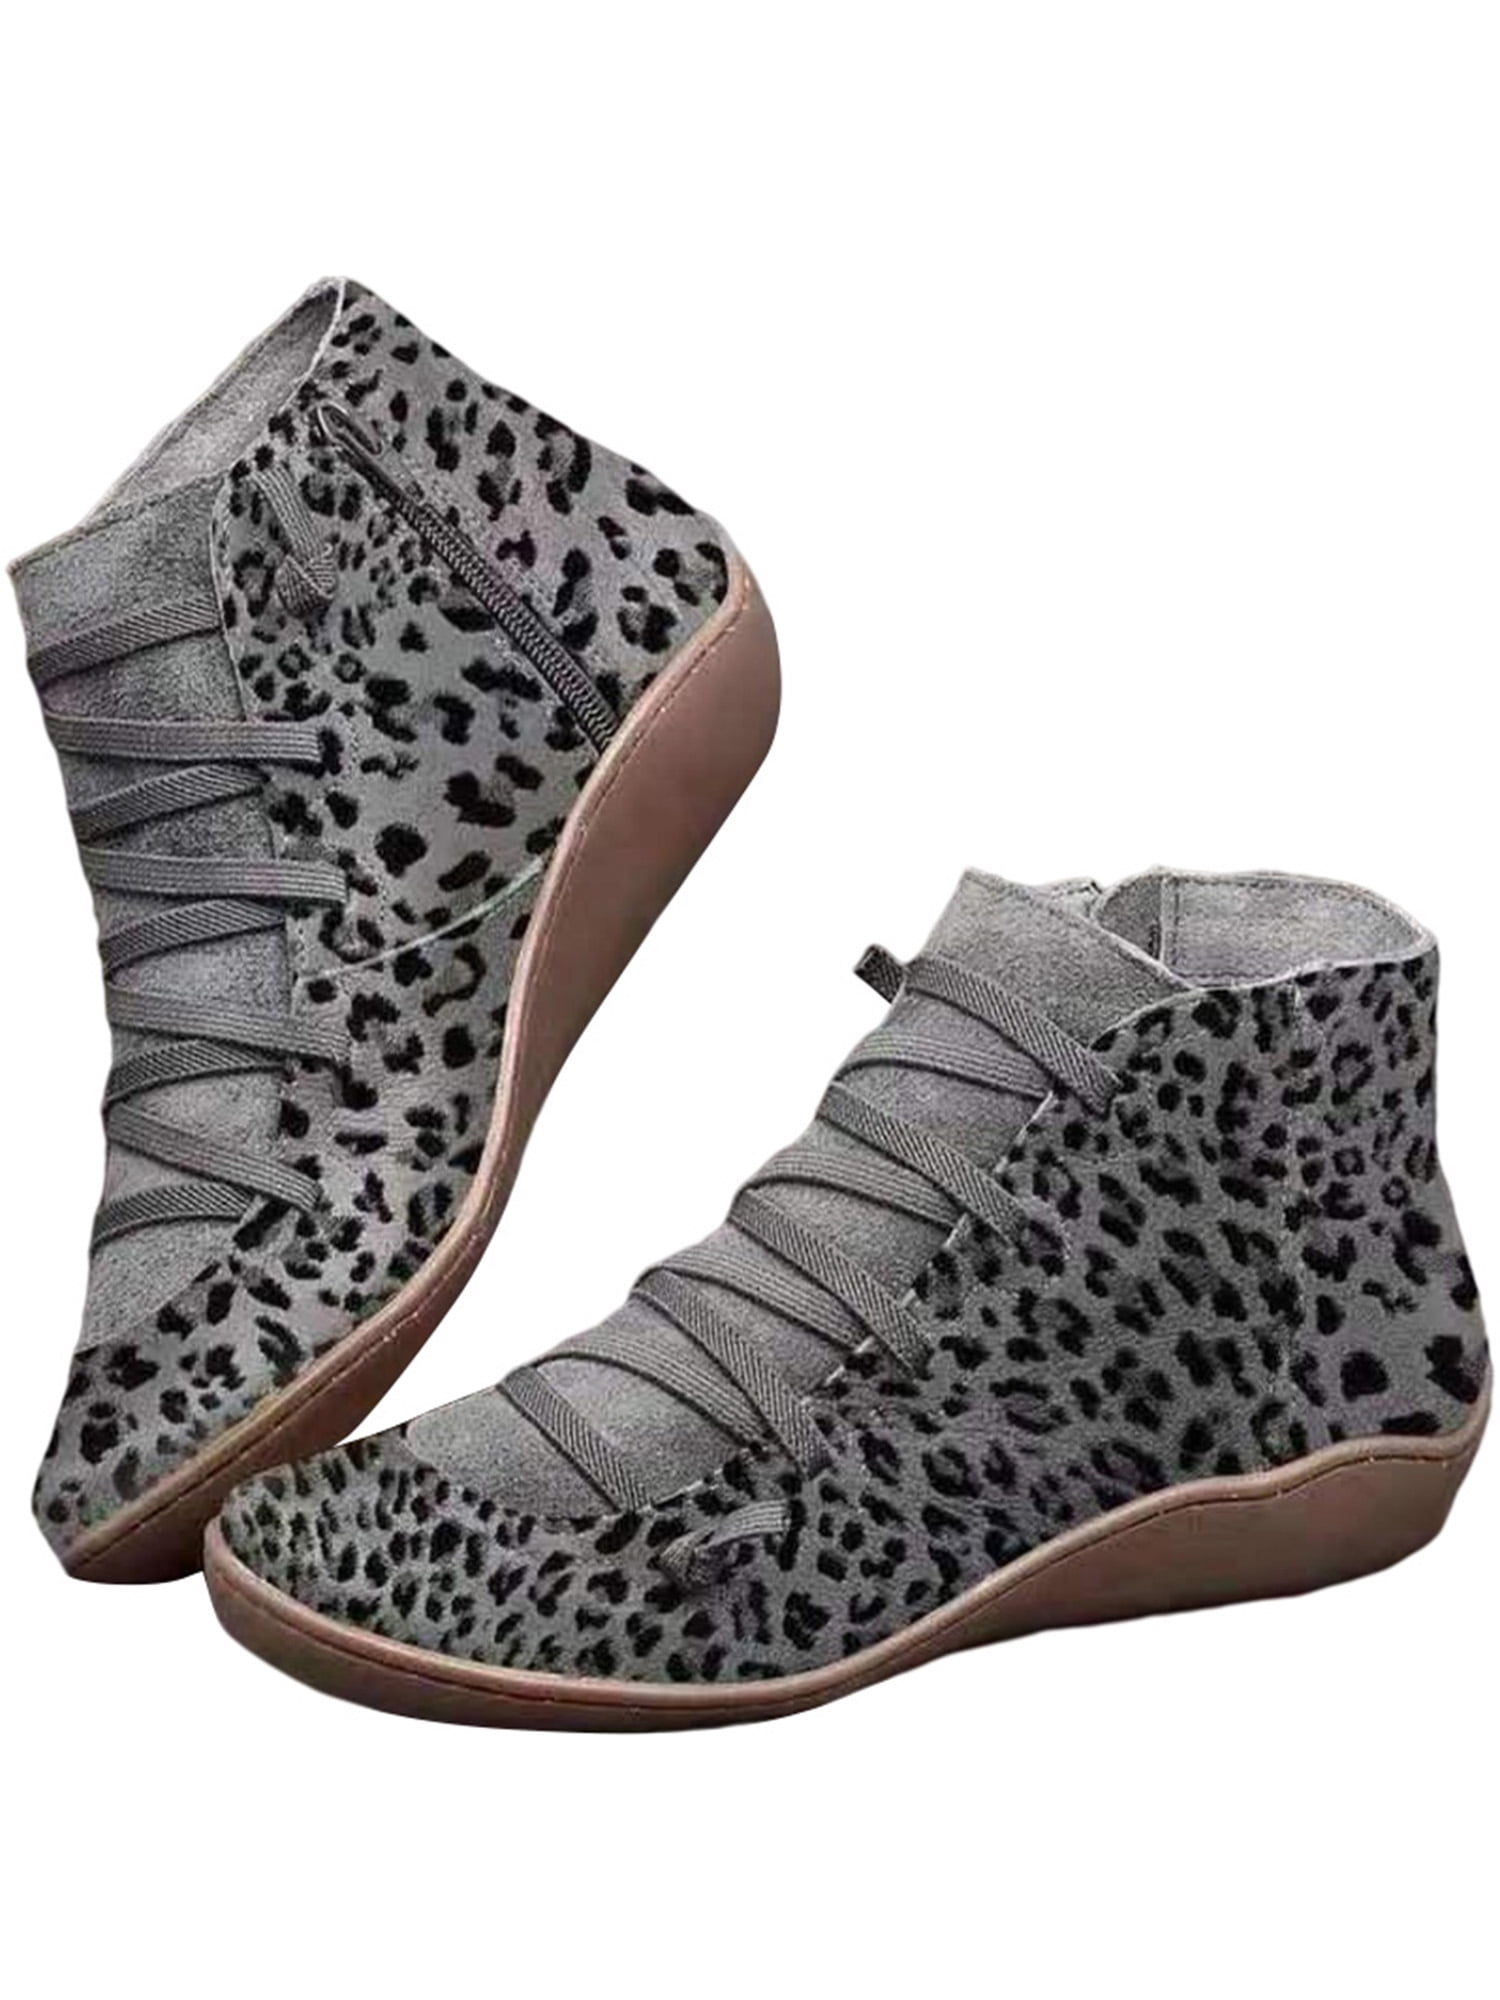 Womens Wedge Boots Sneakers Fashion Perforated High Top Side Zipper Platform Leopard Snake Ankle Booties Flat Shoes 